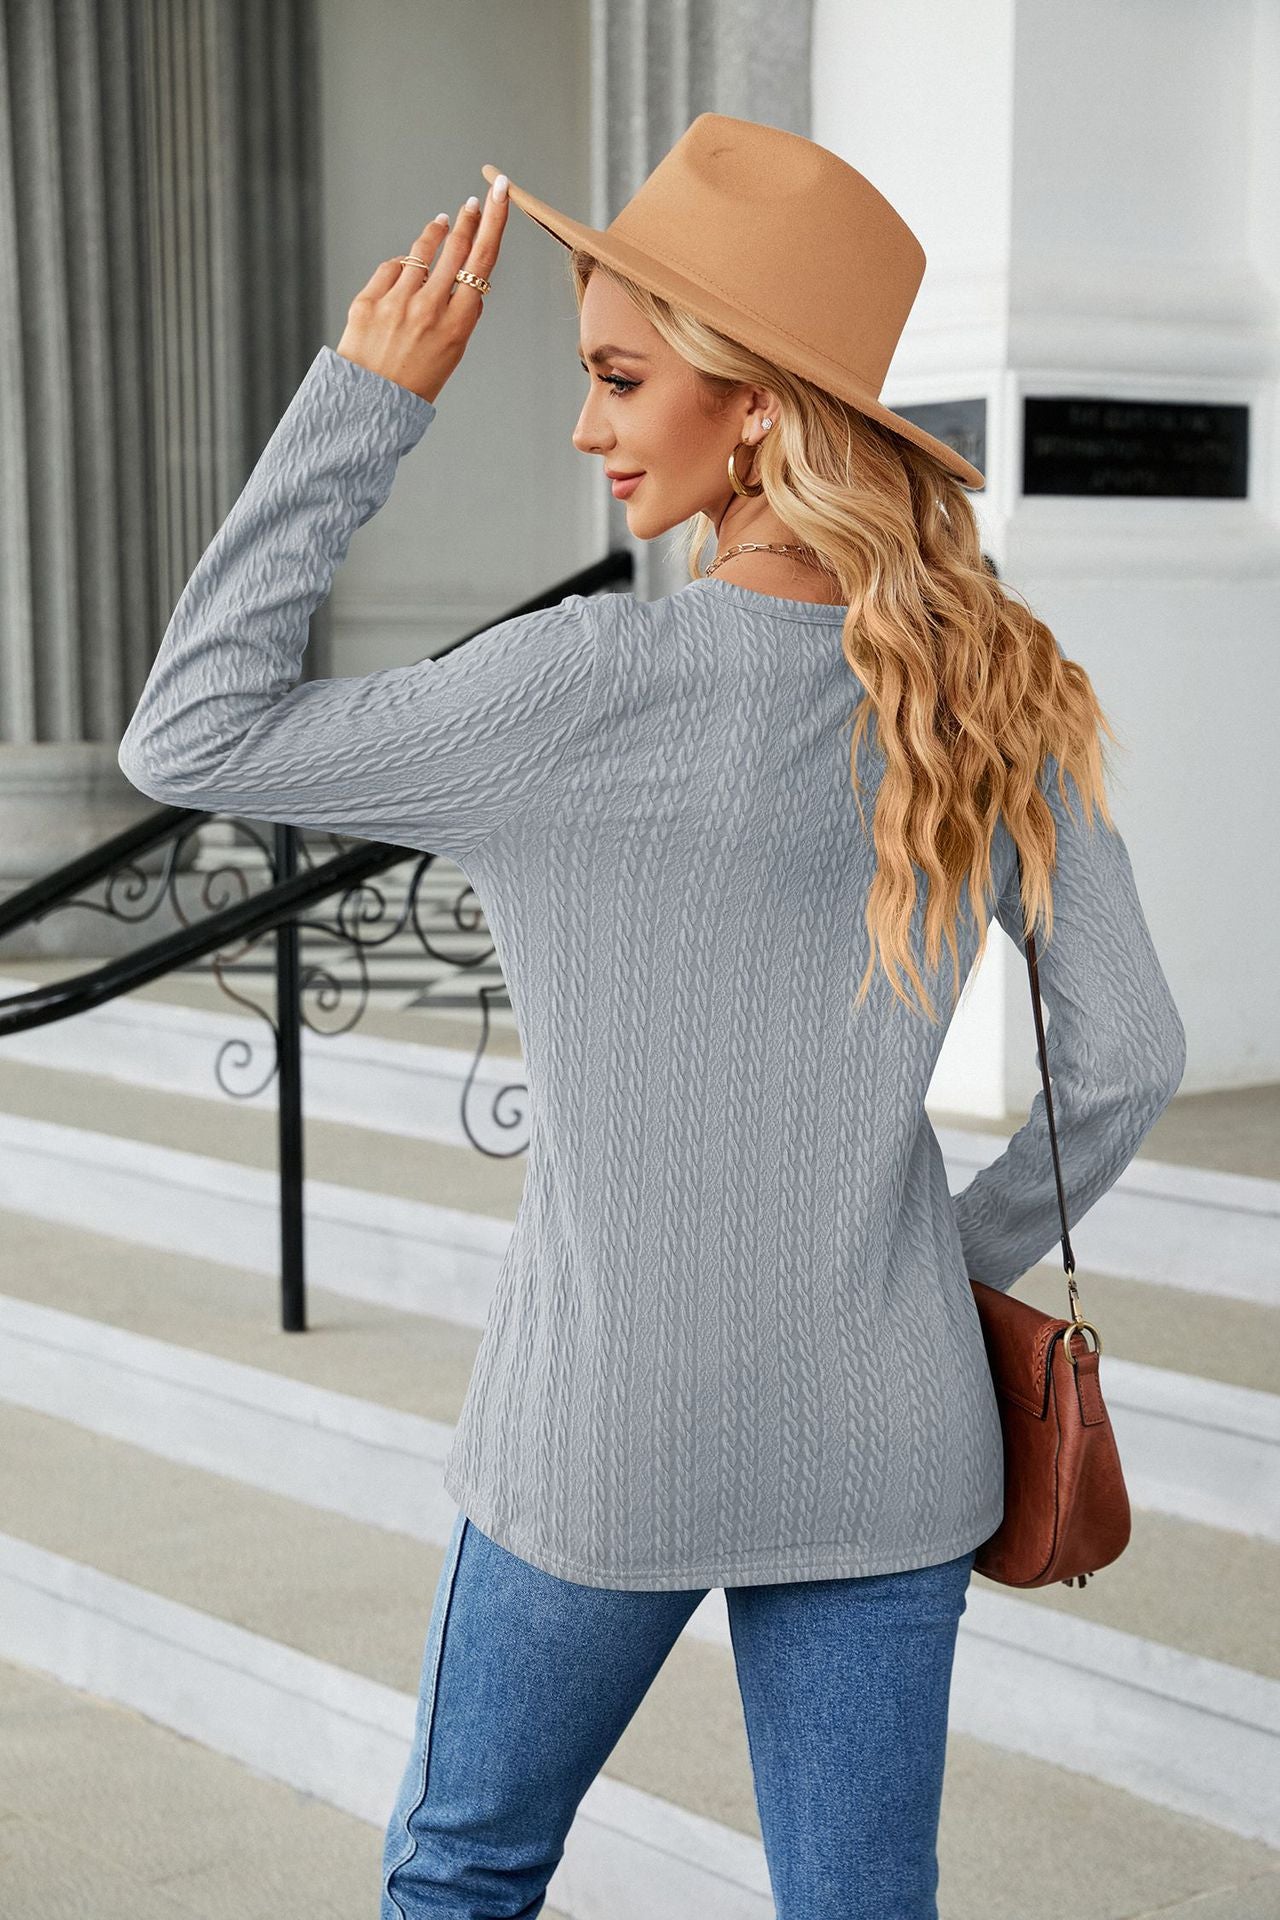 Autumn Winter Solid Color V neck Button Loose Long Sleeved T shirt Top Women Clothing Button